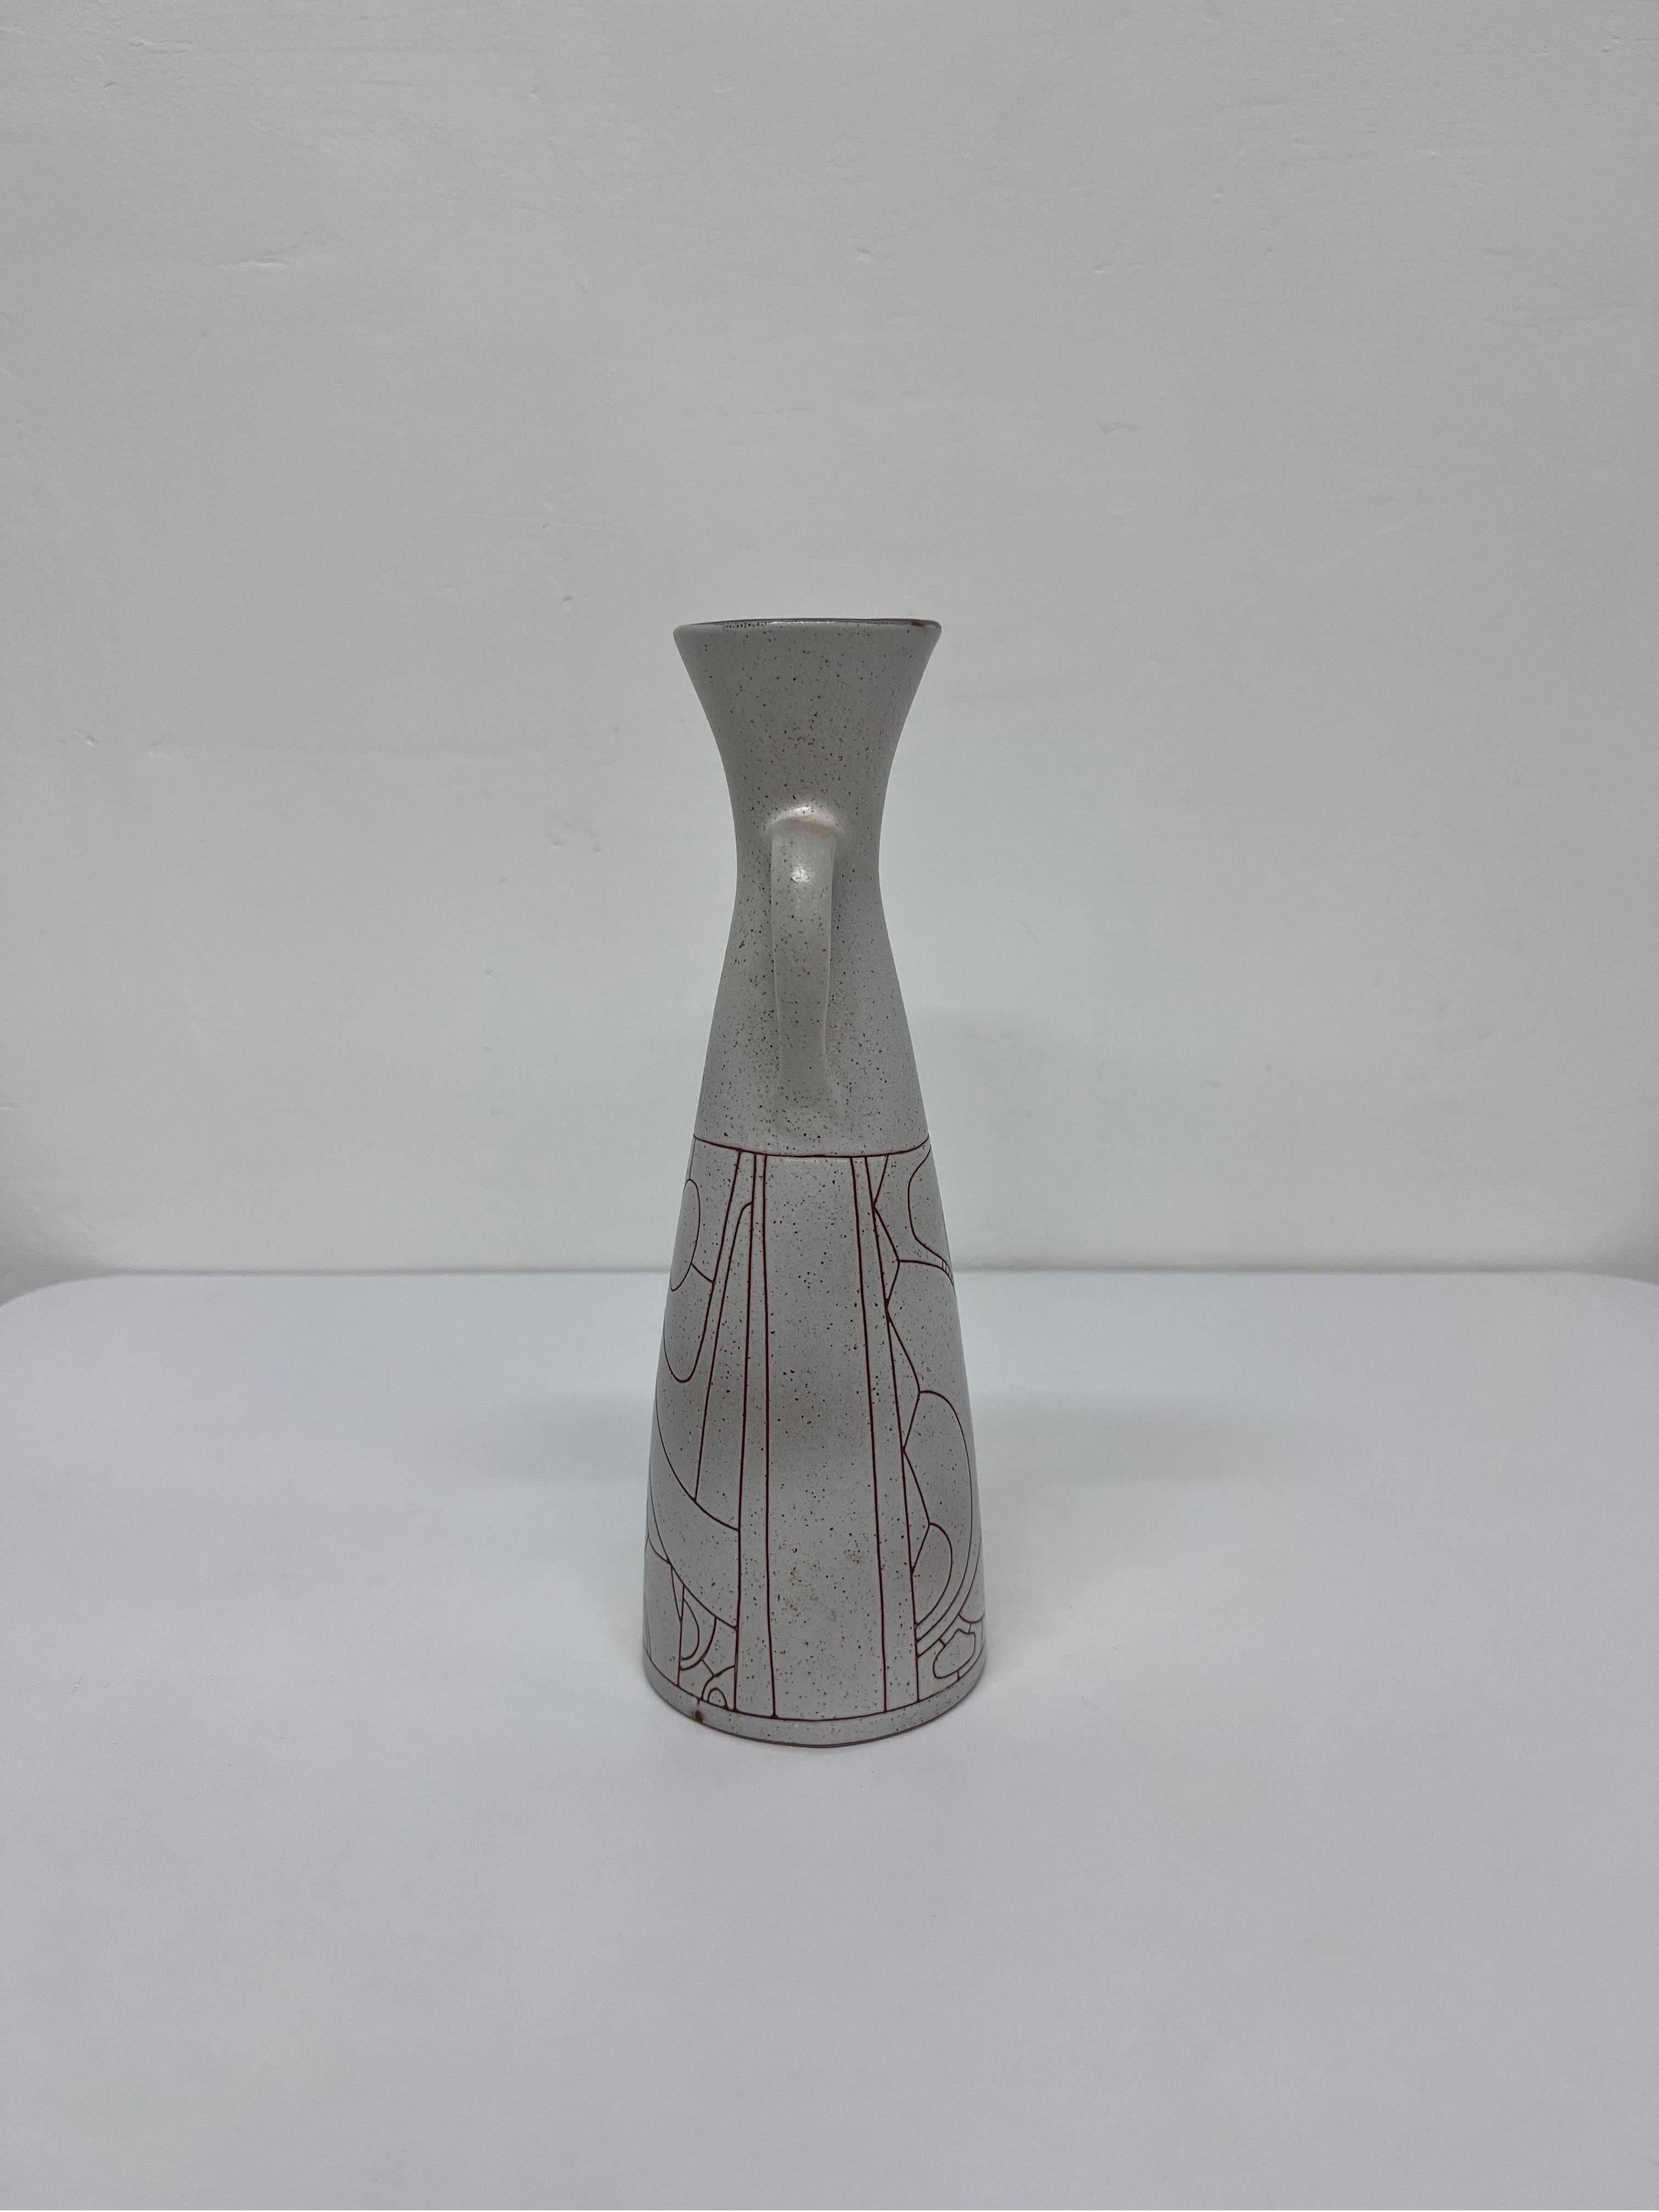 Modernist Geometric Stoneware Carafe or Pitcher by Lapid Israel Pottery 1